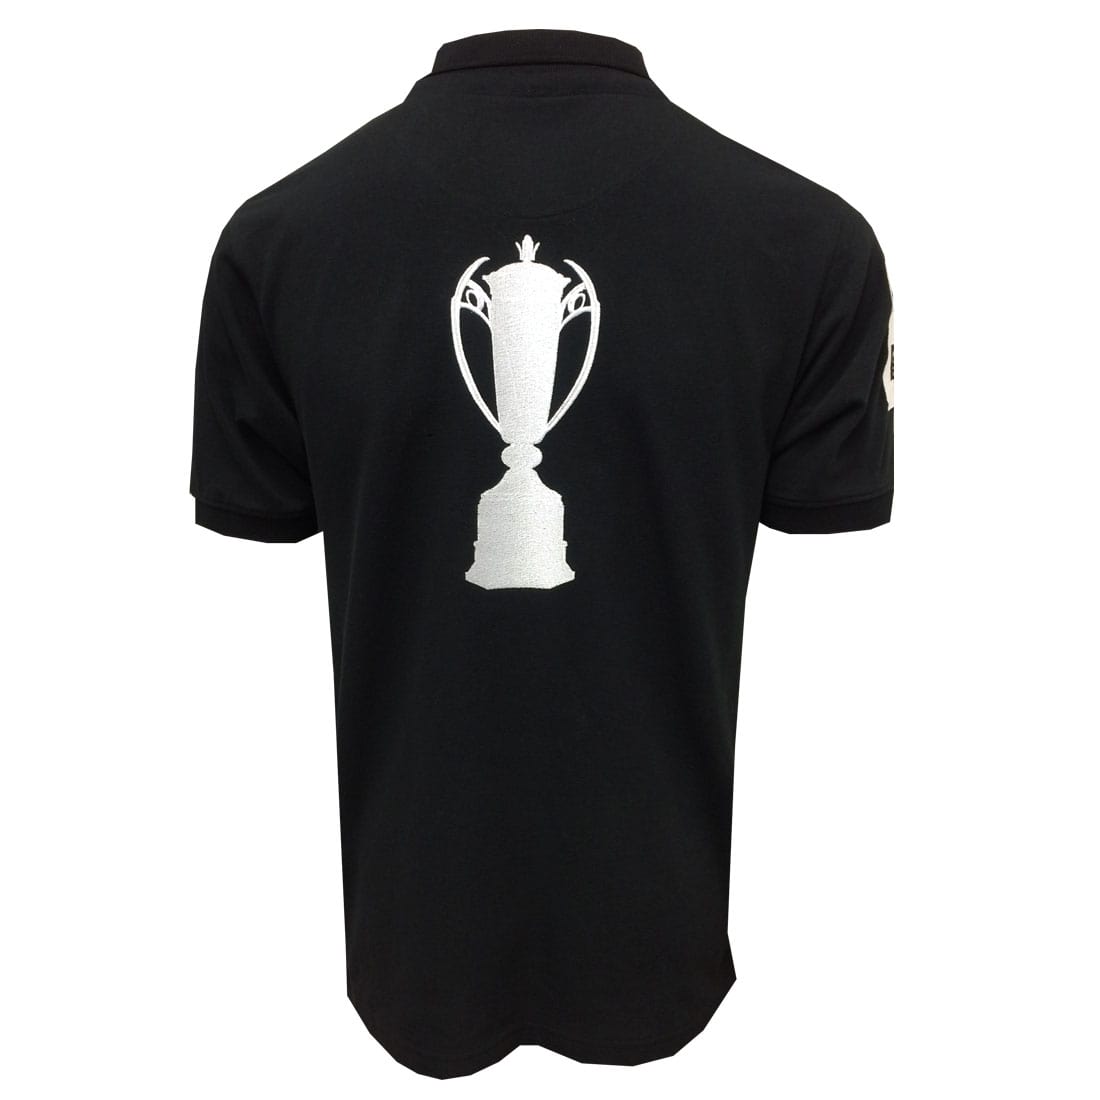 The back of a Six Nations Black Polo shirt with a white Guinness UK cup on it.